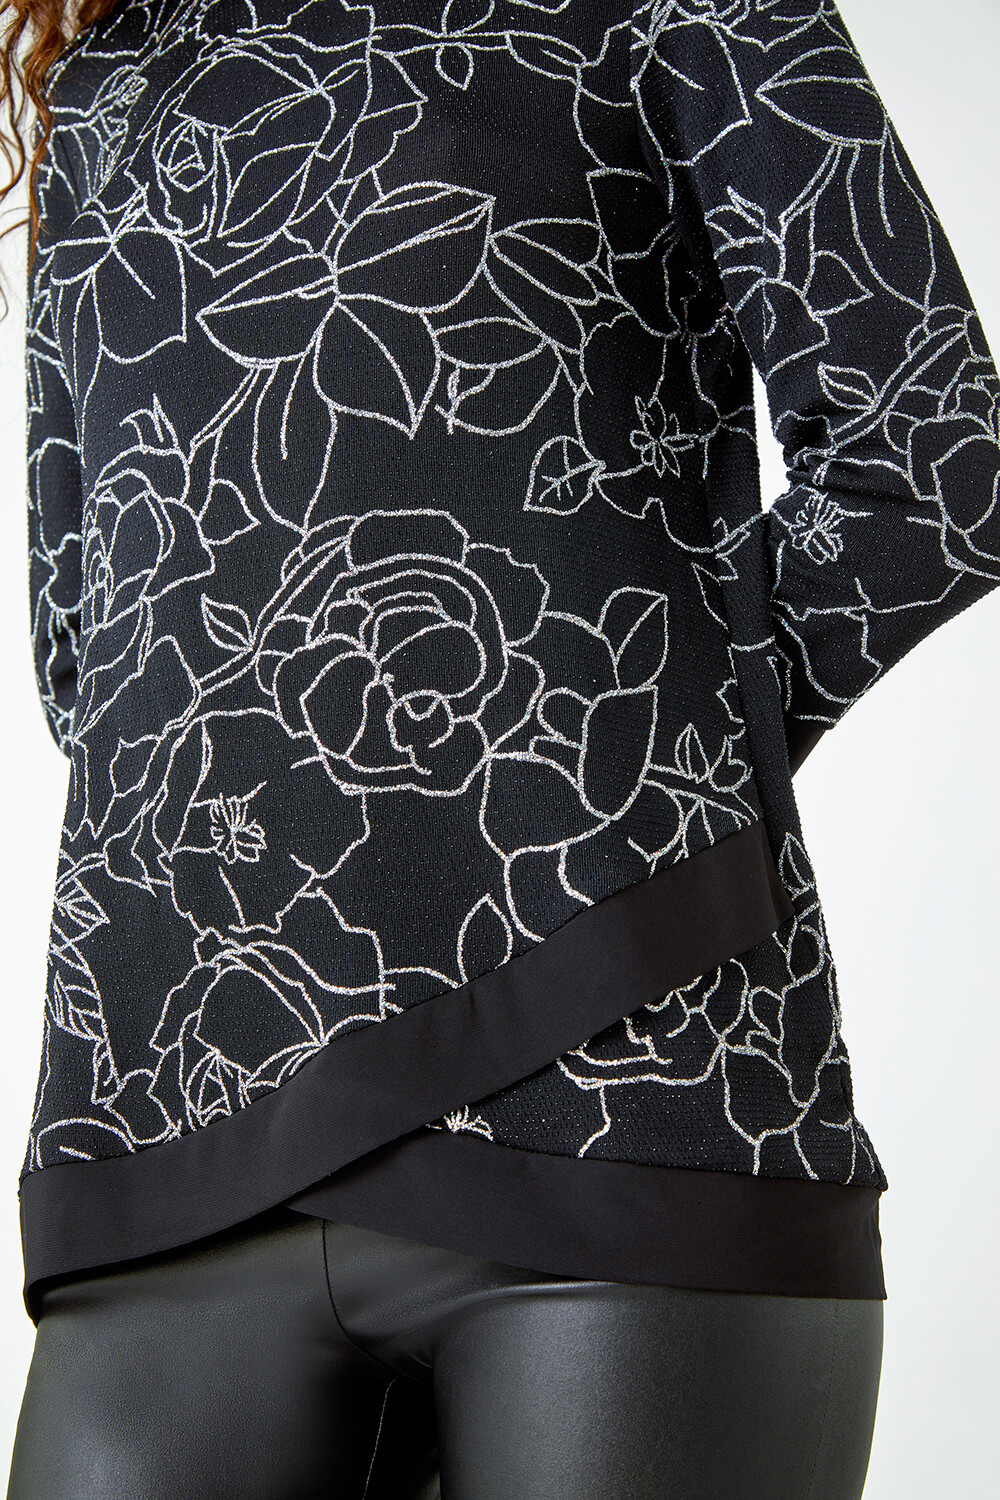 Silver Glitter Rose Print Layered Stretch Top, Image 5 of 5